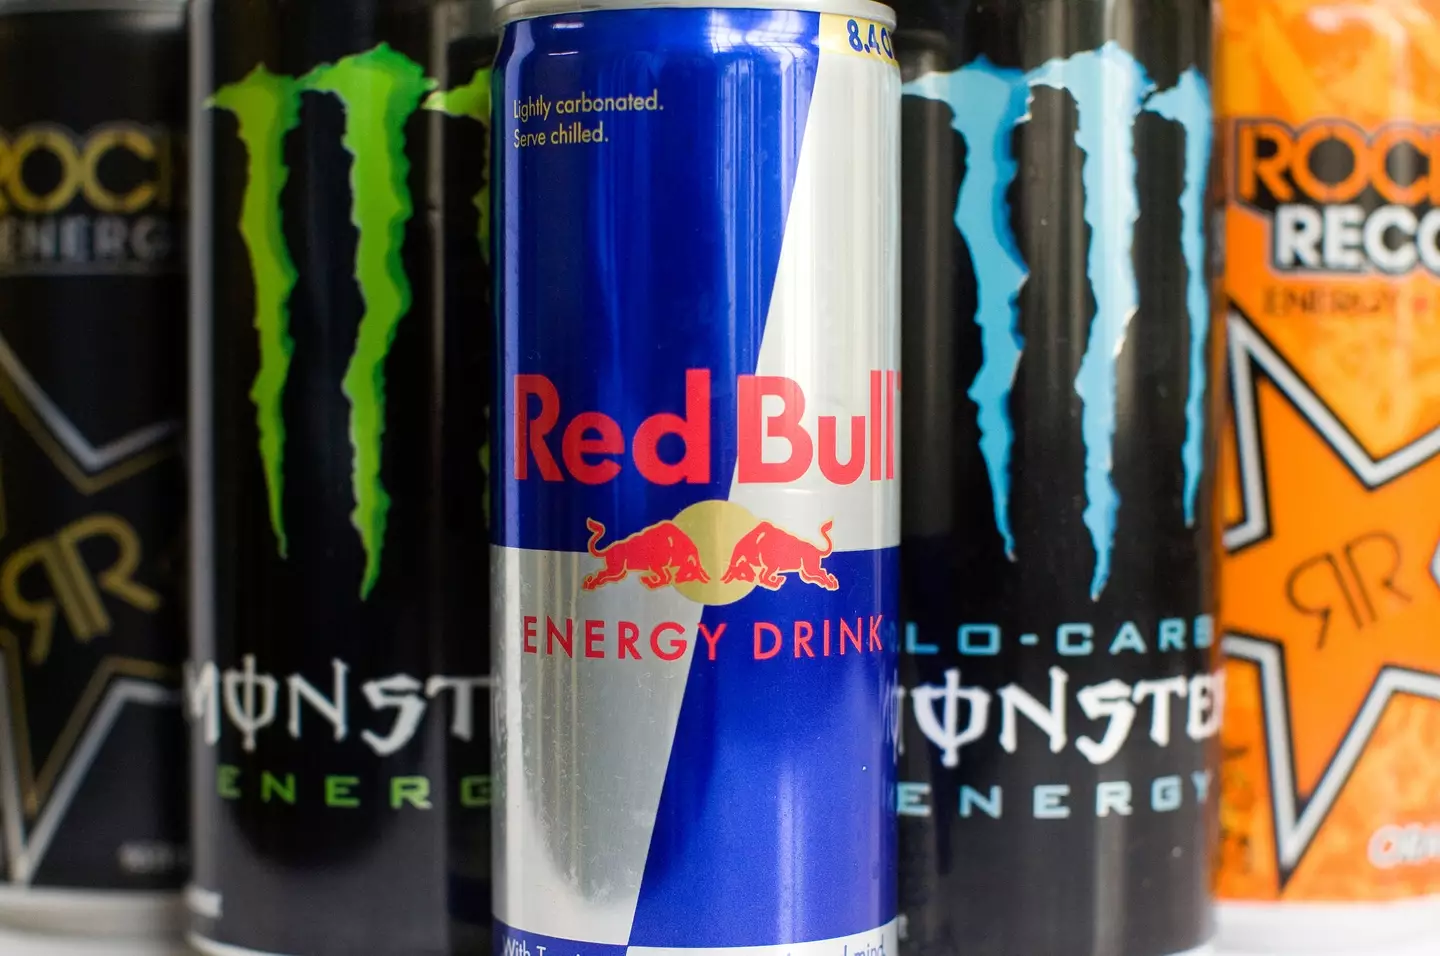 This doesn't mean you should start guzzling energy drinks, by the way.